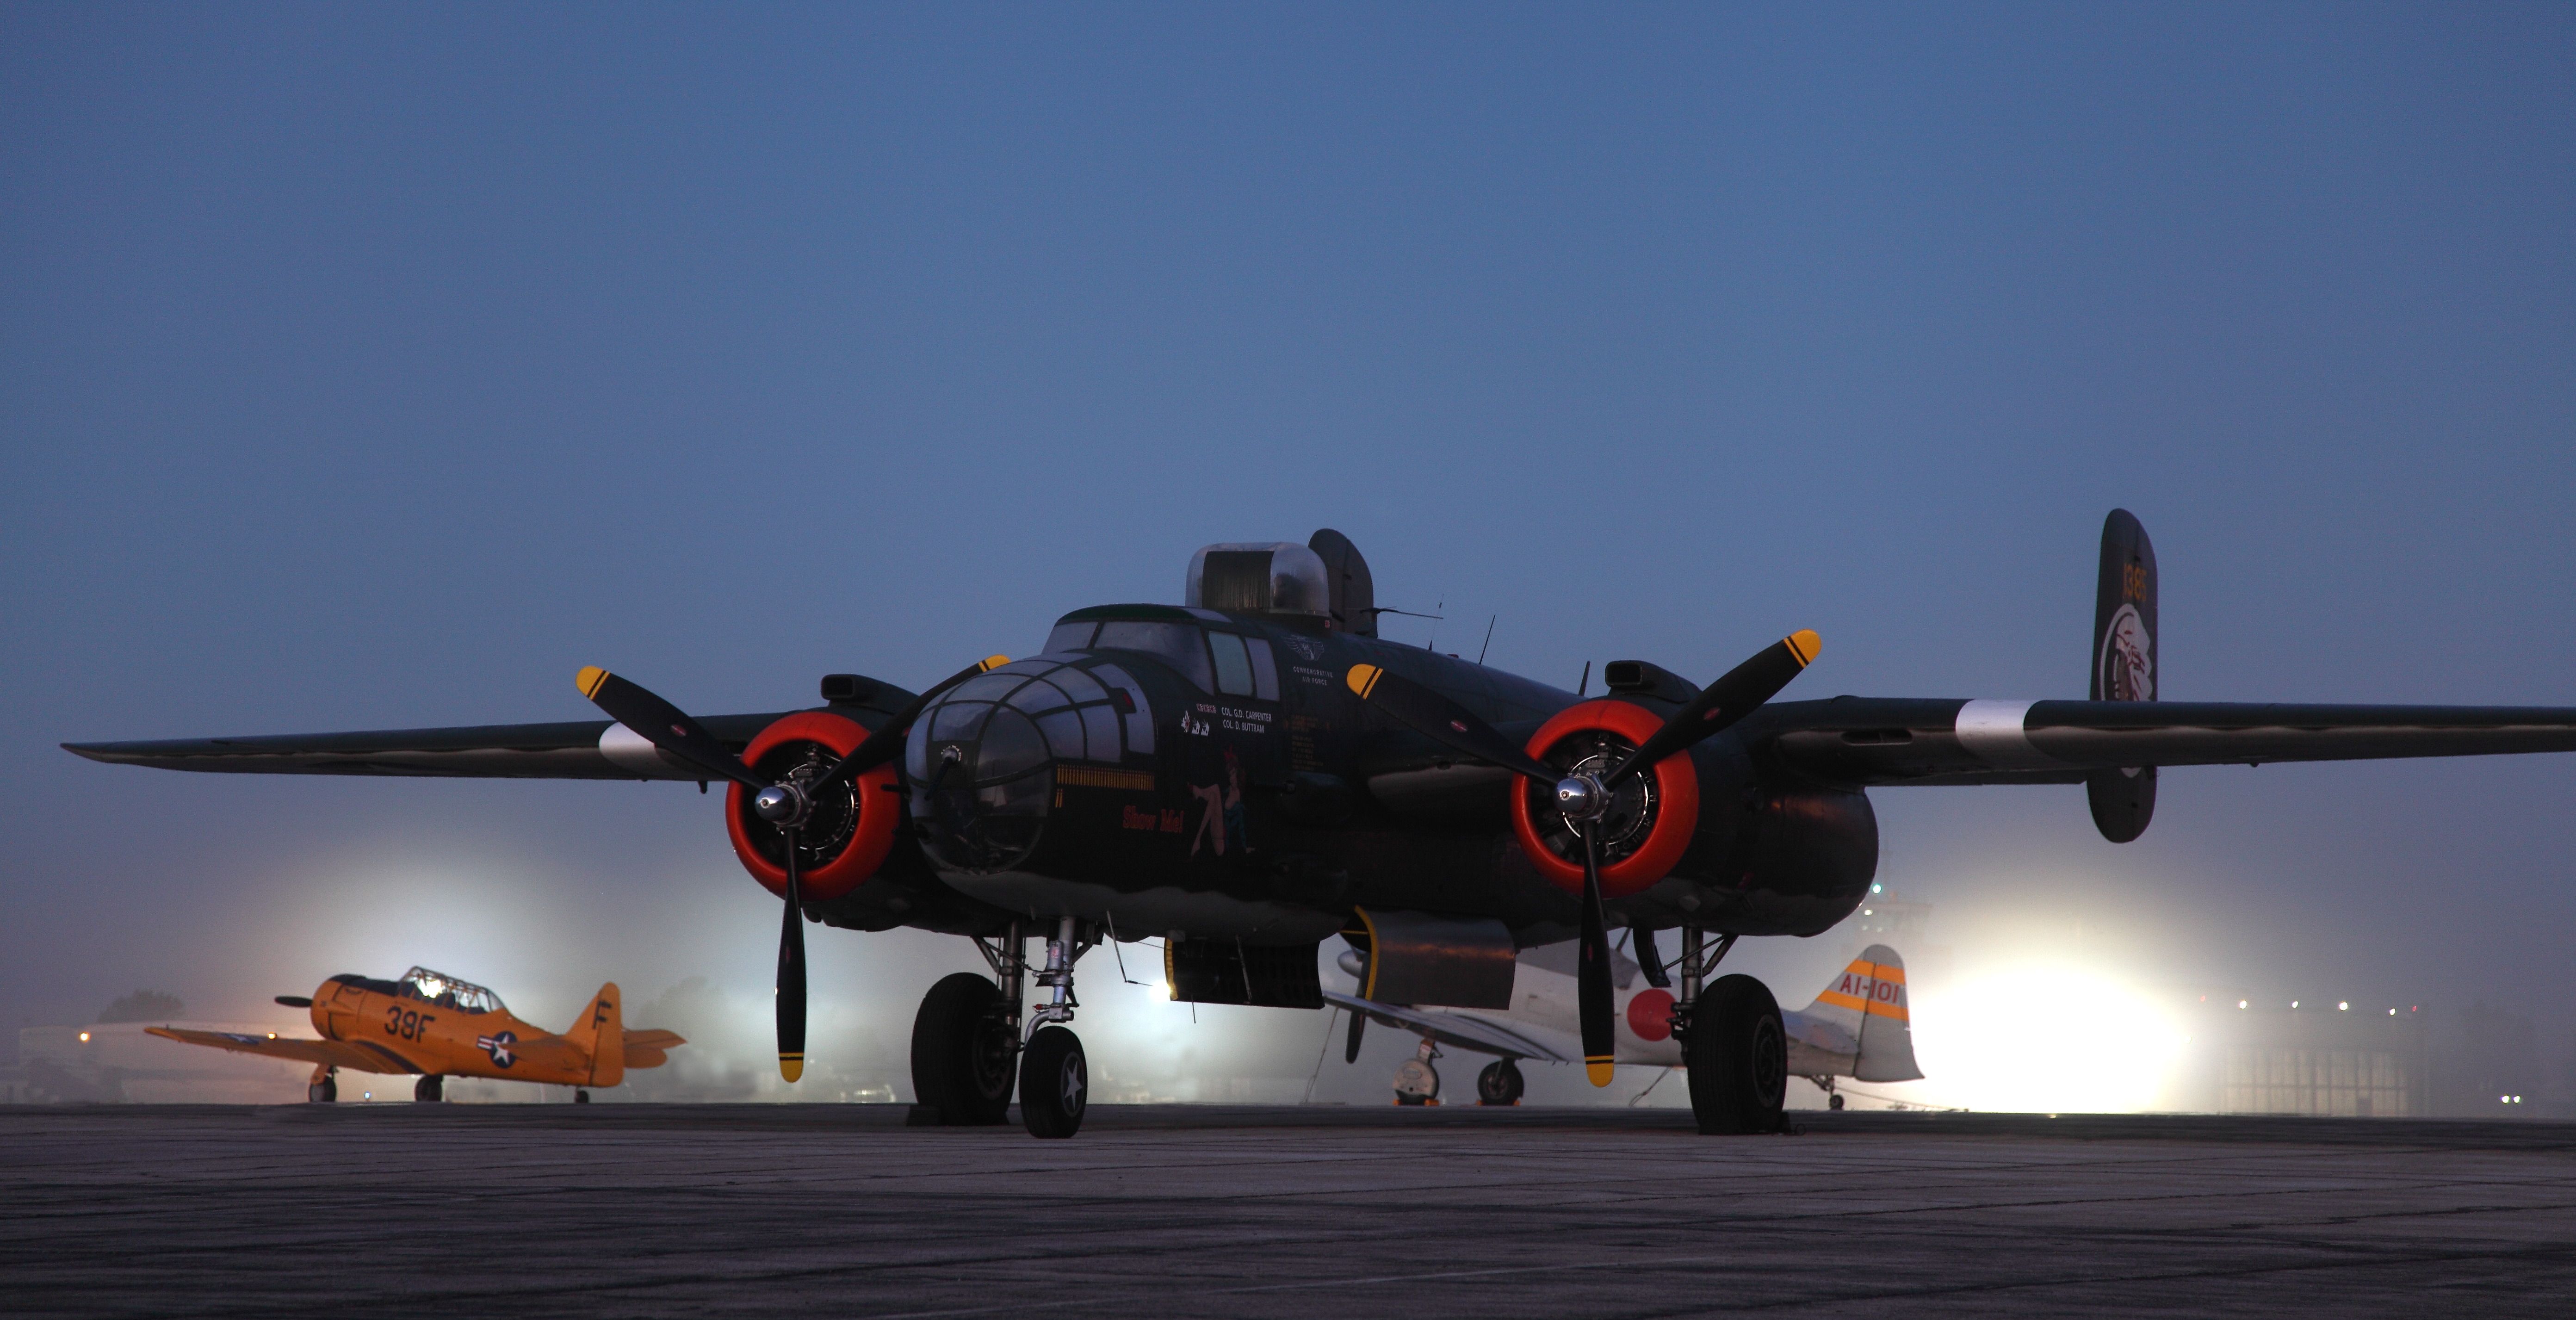 North American TB-25 Mitchell — - I got up early to make a sunrise shot of the Commemorative Air Force Missouri Wing's B-25, "Show Me". The weather had another ideas. I got a fog shot of "Show Me".